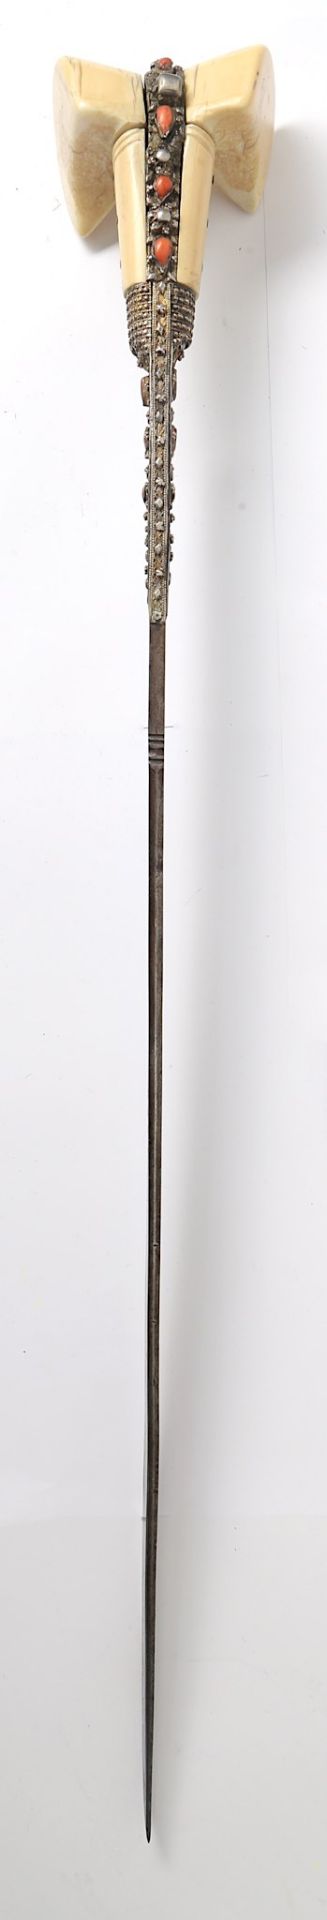 A LARGE-EARED WALRUS IVORY-HILTED YATAGHAN Ottoman - Image 4 of 9